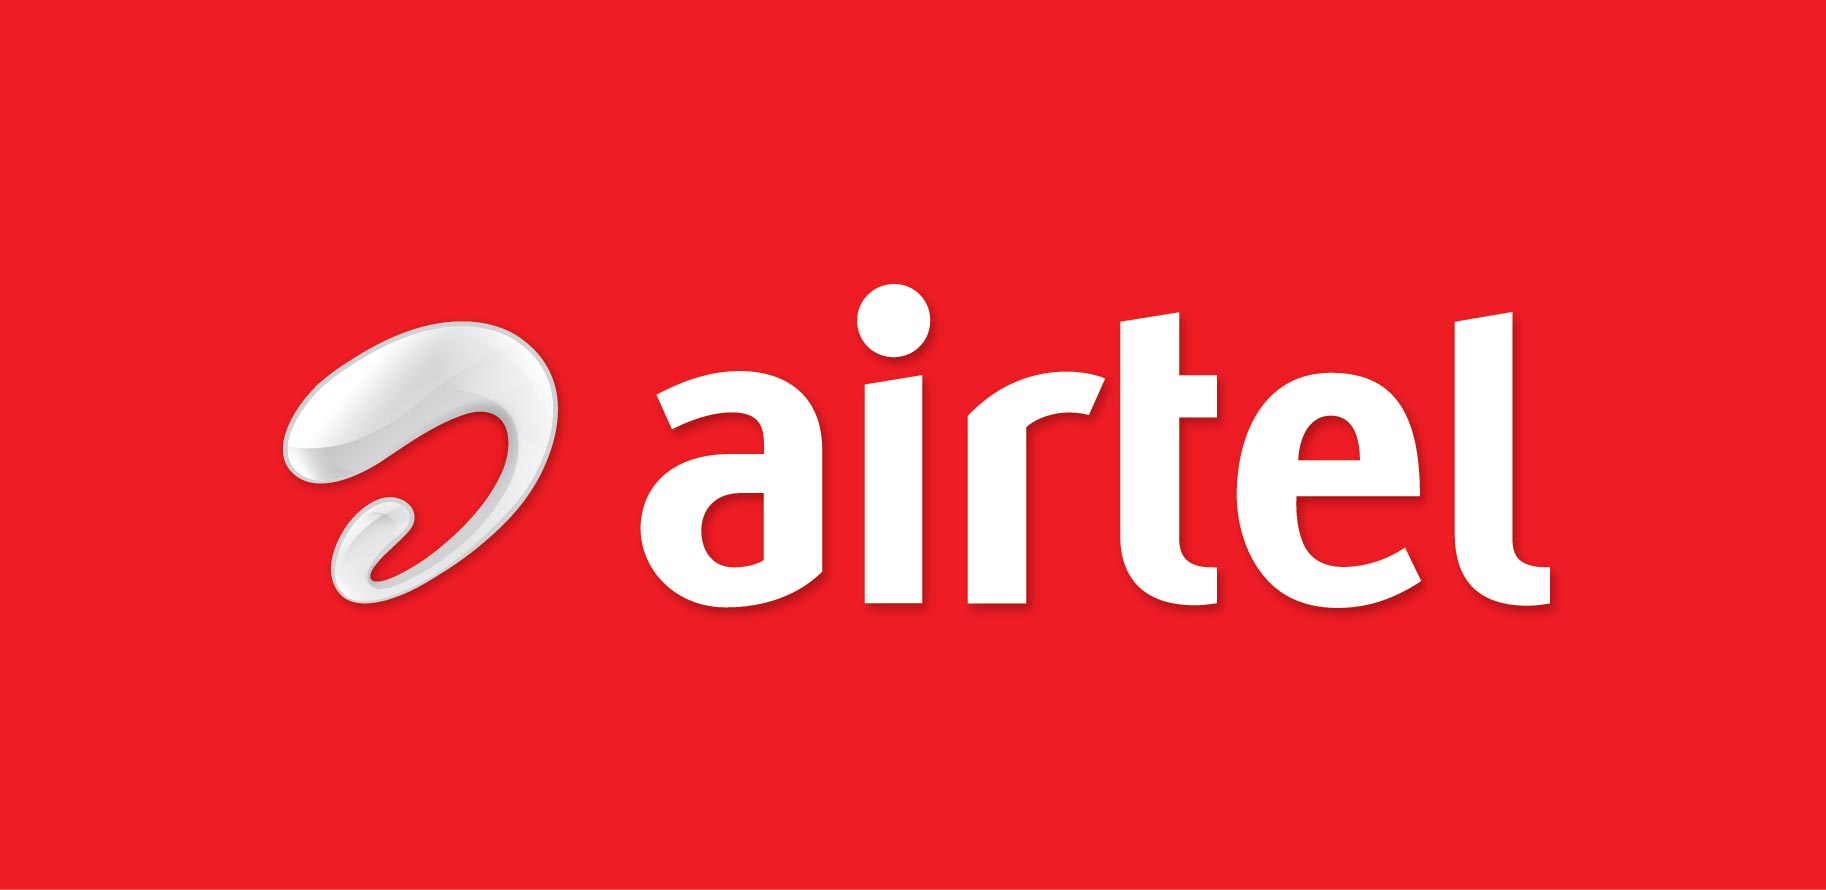 Airtel the fastest ISP,Netflix ISP Speed Index,Airtel is fastest Internet Service Providers, Airtel tops Netflix ISP Speed Index,Airtel fastest ISP,ISP,Netflix India,Airtel Broadband,Mango News,Latest Technology News, Latest Airtel Offers